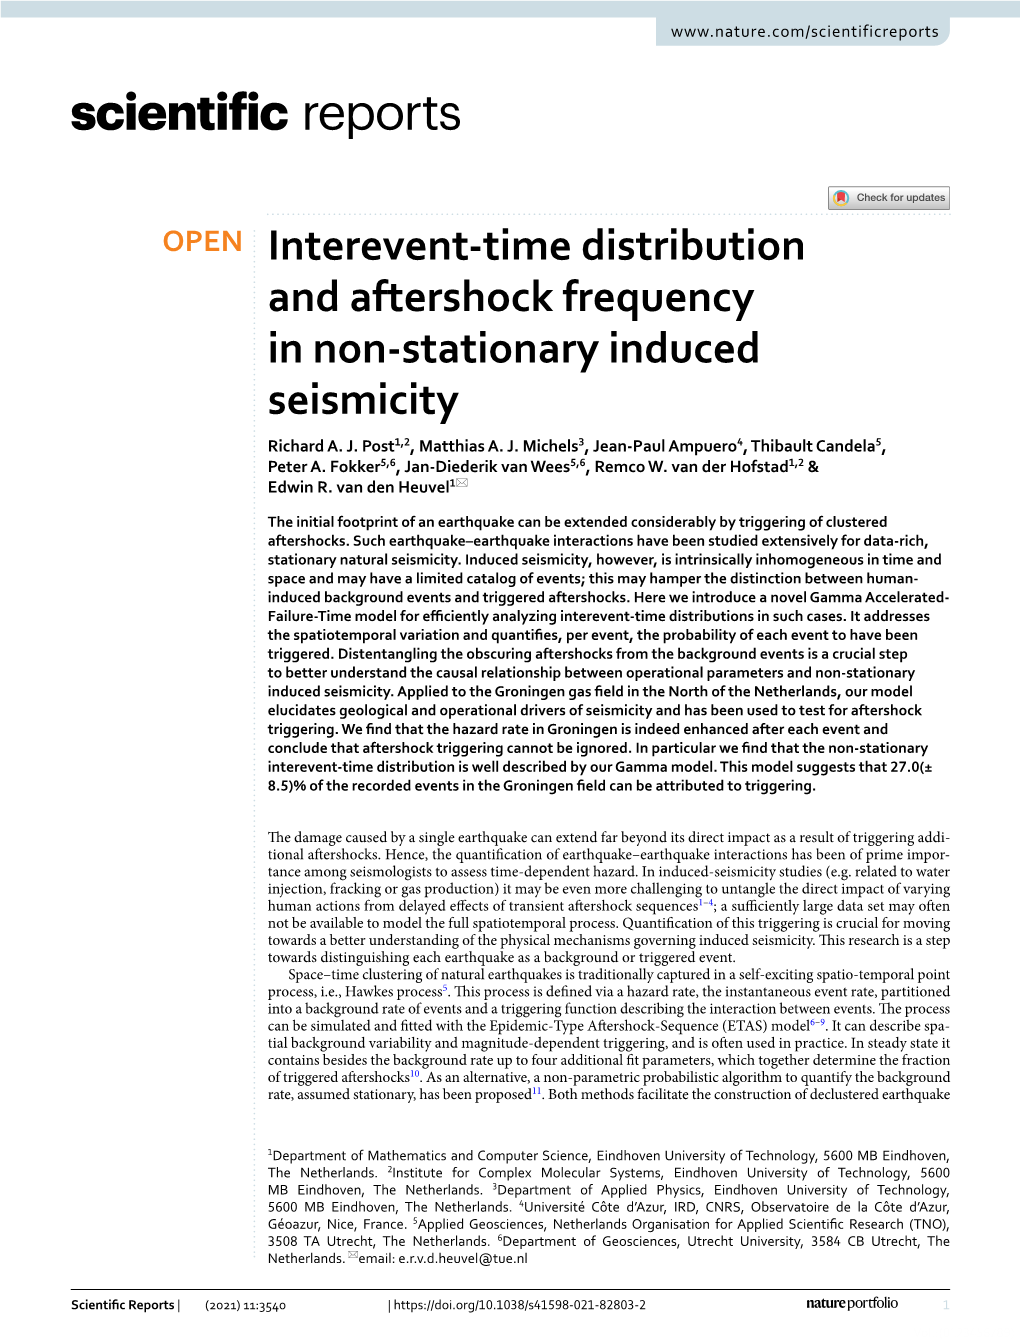 Interevent-Time Distribution and Aftershock Frequency in Non-Stationary Induced Seismicity